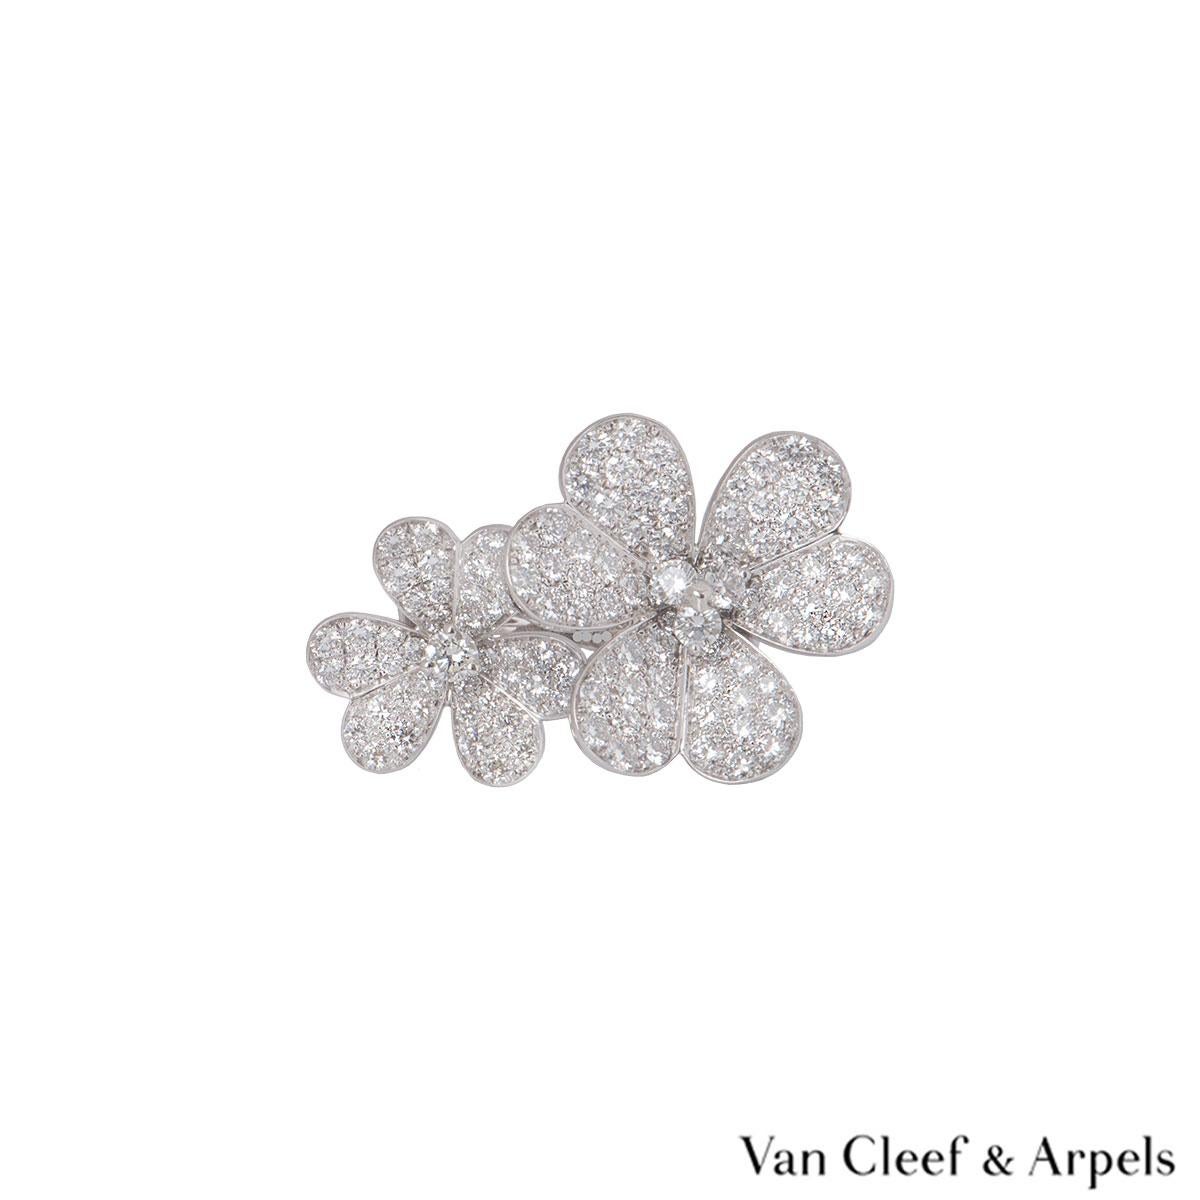 An 18k white gold and diamond ring by Van Cleef & Arpels from the Flora collection. The ring comprises of 2 flowers set with round brilliant cut diamonds in a pave setting on the petals and round brilliant cut diamonds in the centre. The ring has